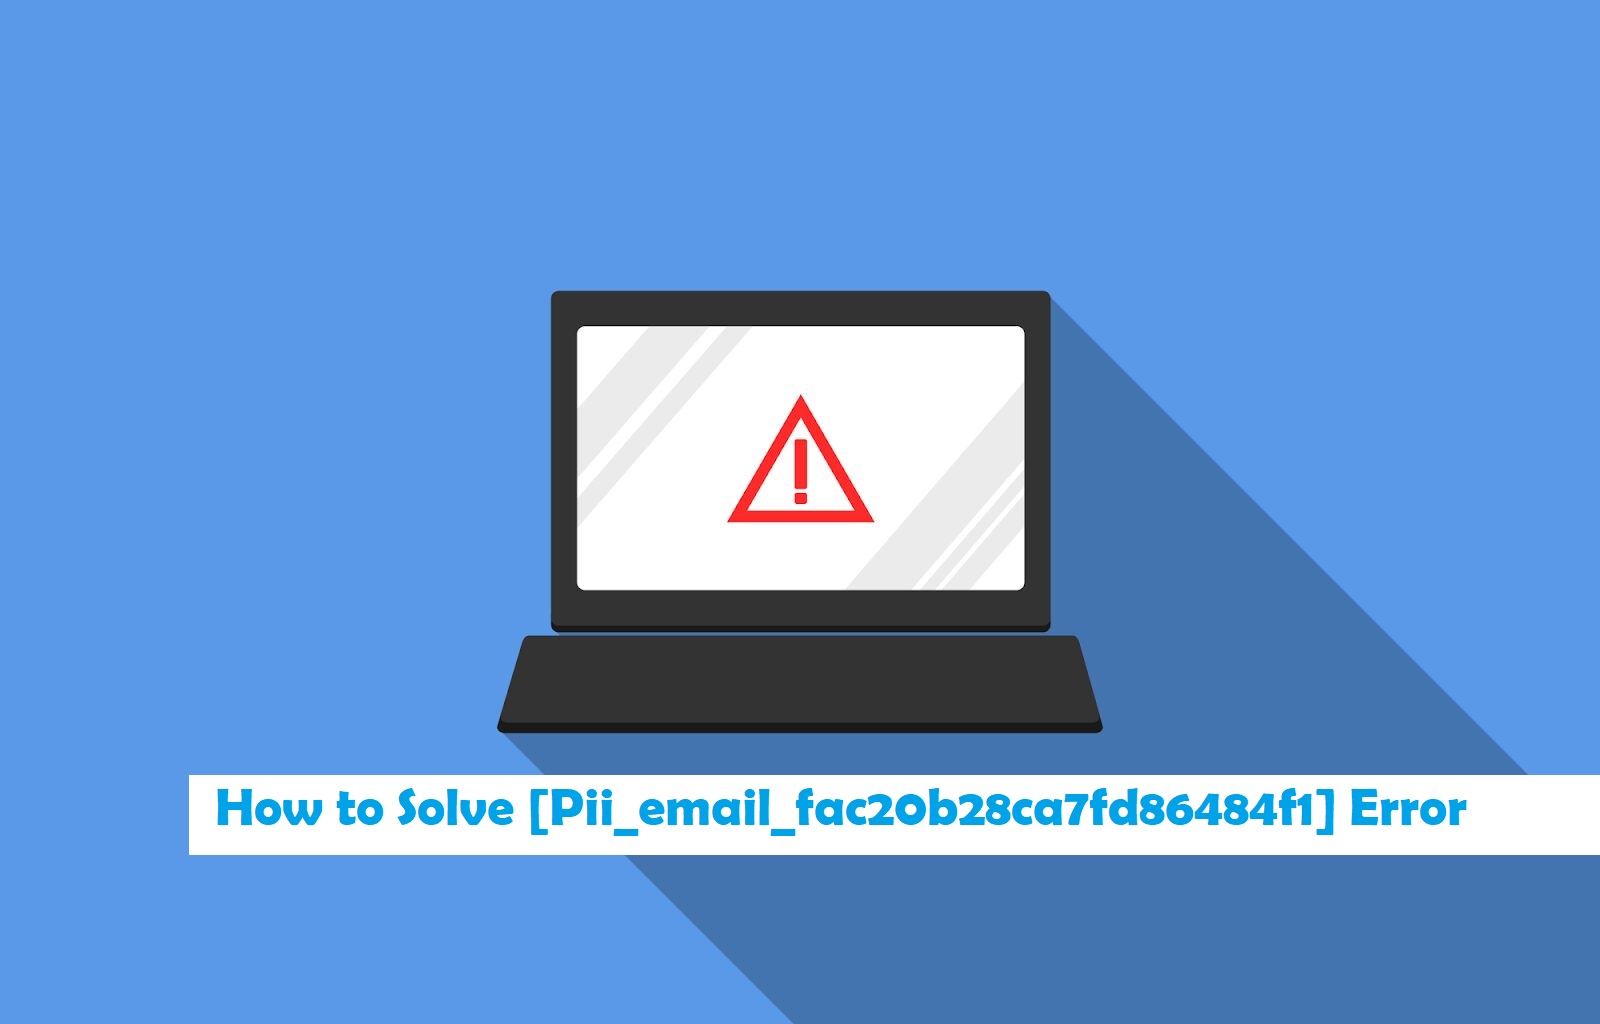 [100% SOLVED] How to Solve [Pii_email_fac20b28ca7fd86484f1] Error : Step by Step